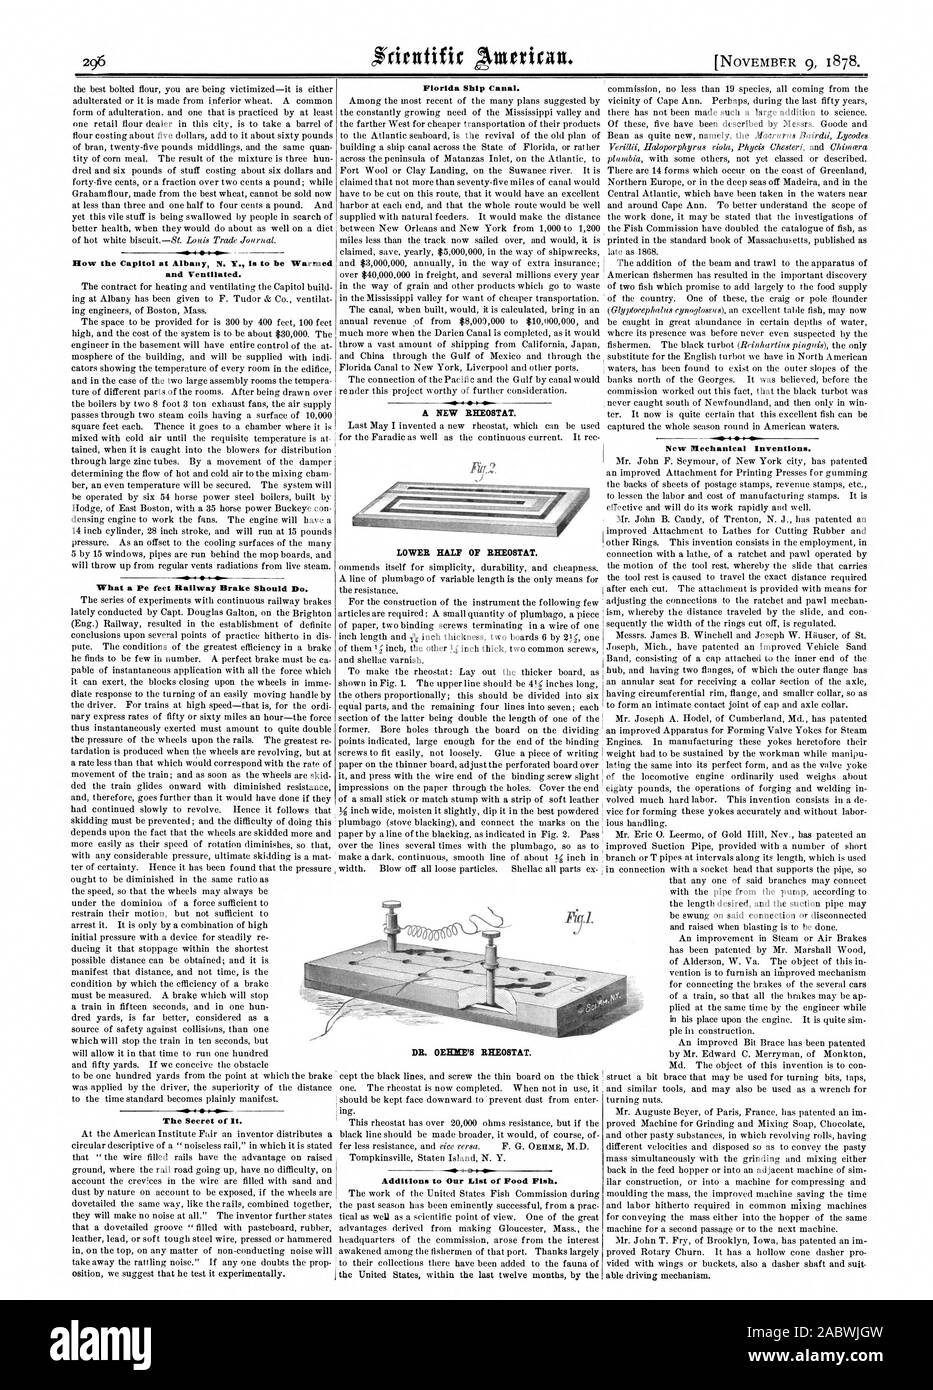 How the Capitol at Albany N. Y. is to be Warmed and Ventilated. What a Pe feet Railway Brake Should Do. Florida Ship Canal. A NEW RHEOSTAT. LOWER HALF OF RHEOSTAT. Additions to Our List of Food Fish. New Mechanical Inventions. DR. OEHEE'S RHEOSTAT., scientific american, 1878-11-09 Stock Photo